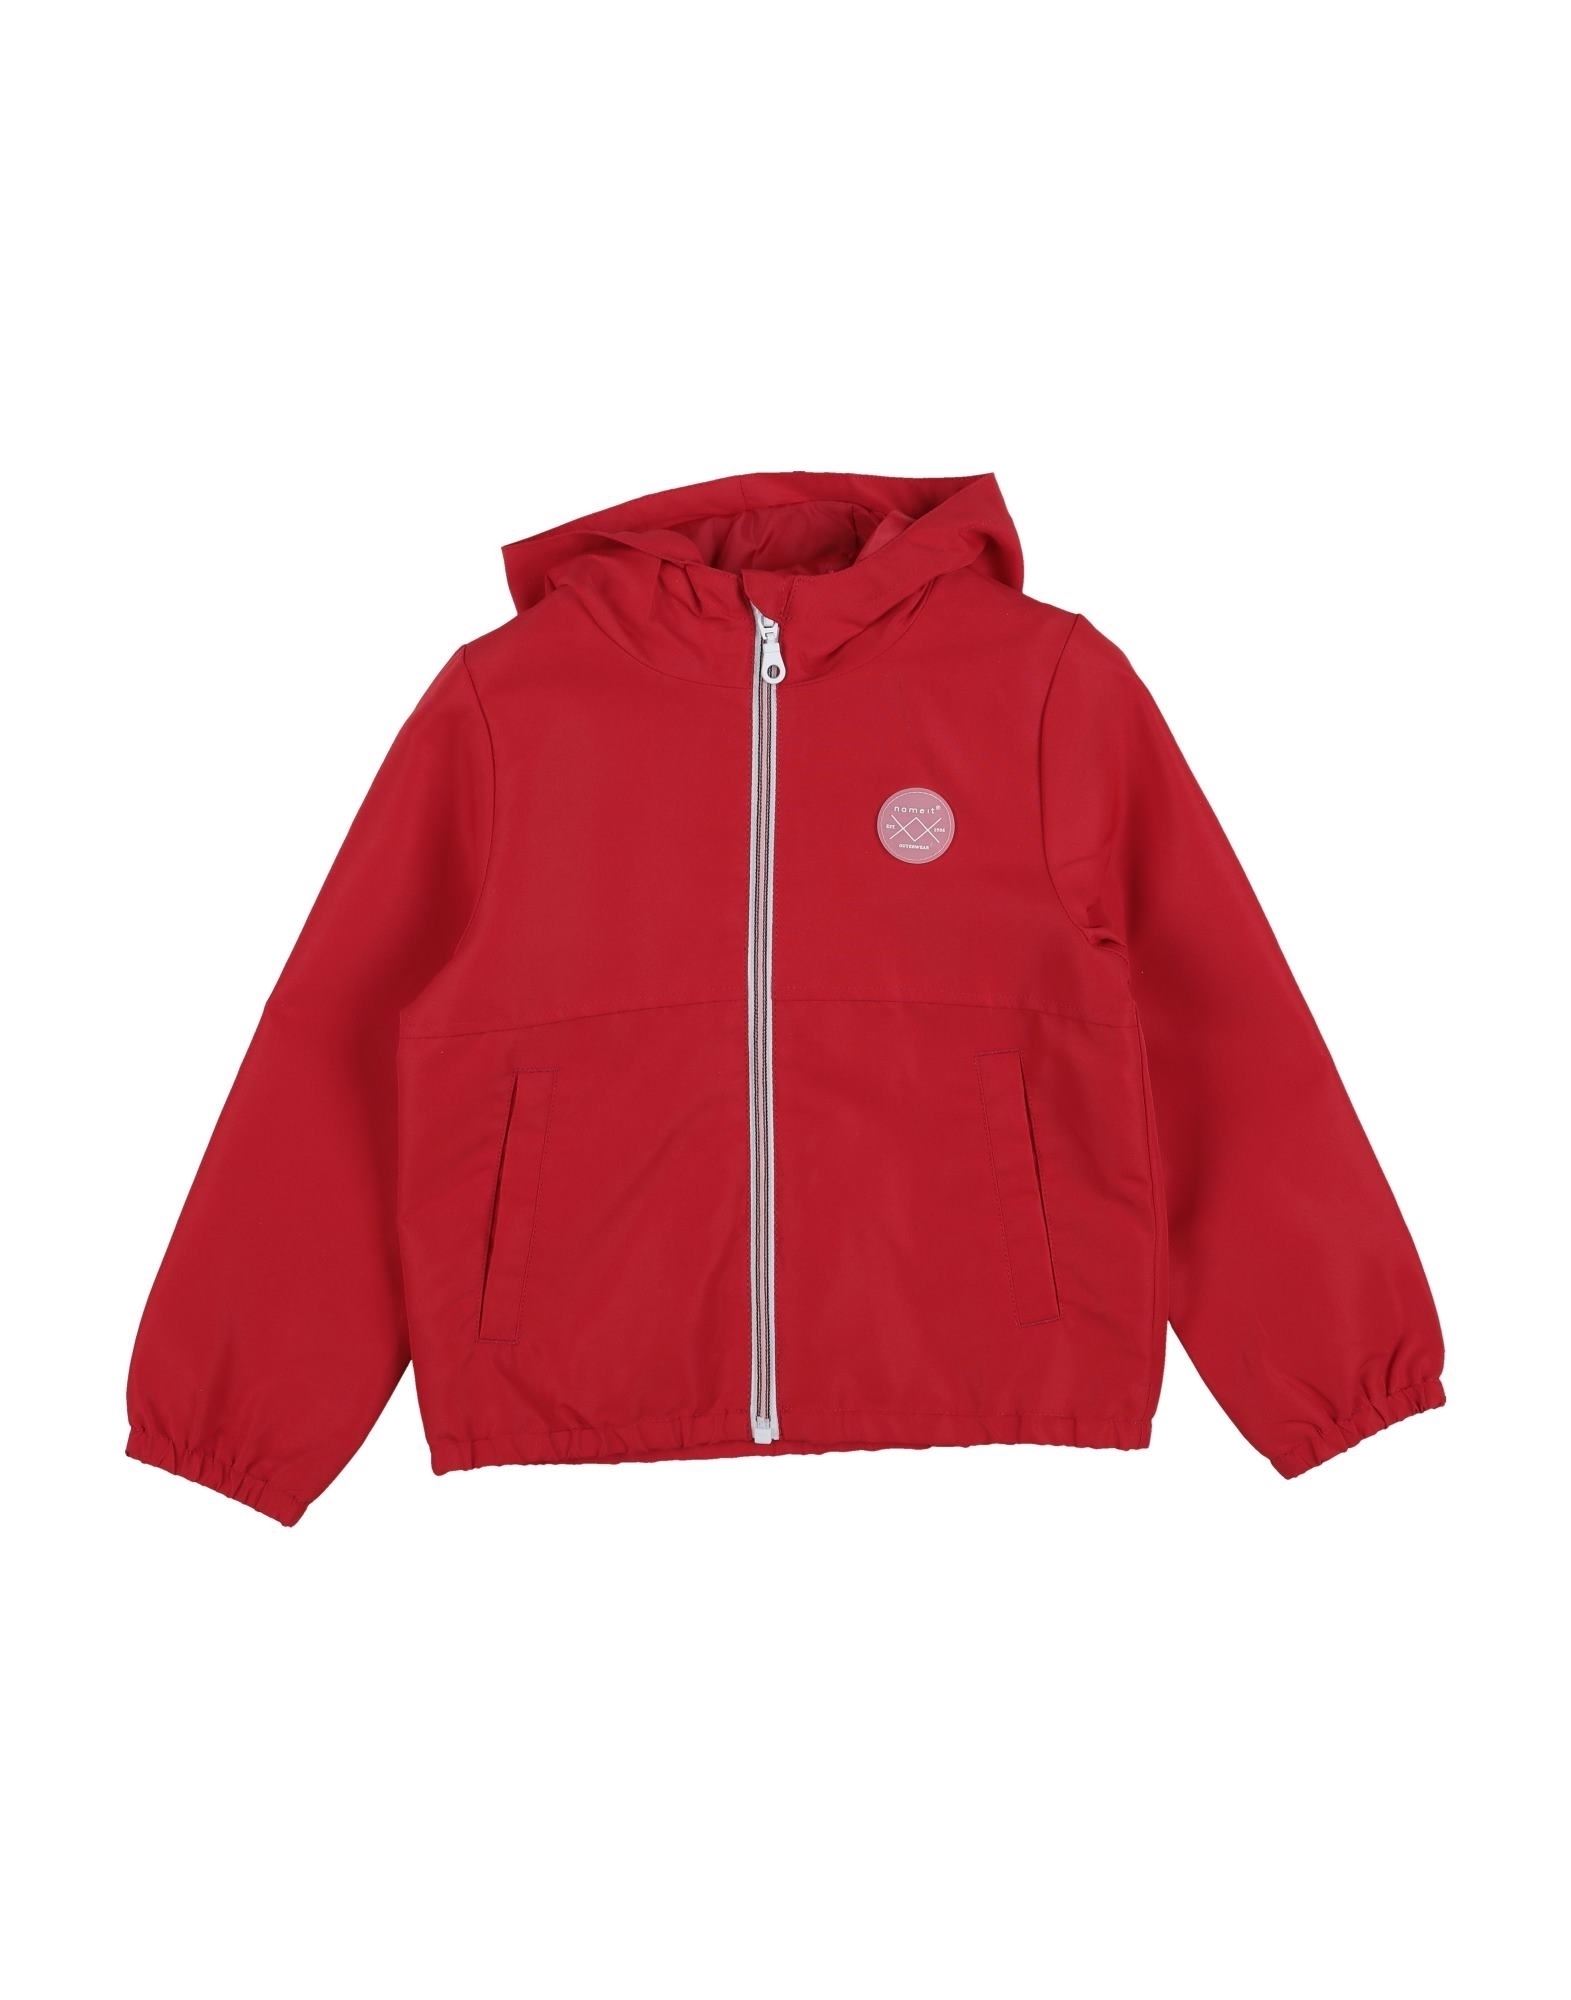 NAME IT® NAME IT TODDLER BOY JACKET RED SIZE 4 RECYCLED POLYESTER,16025669AF 2